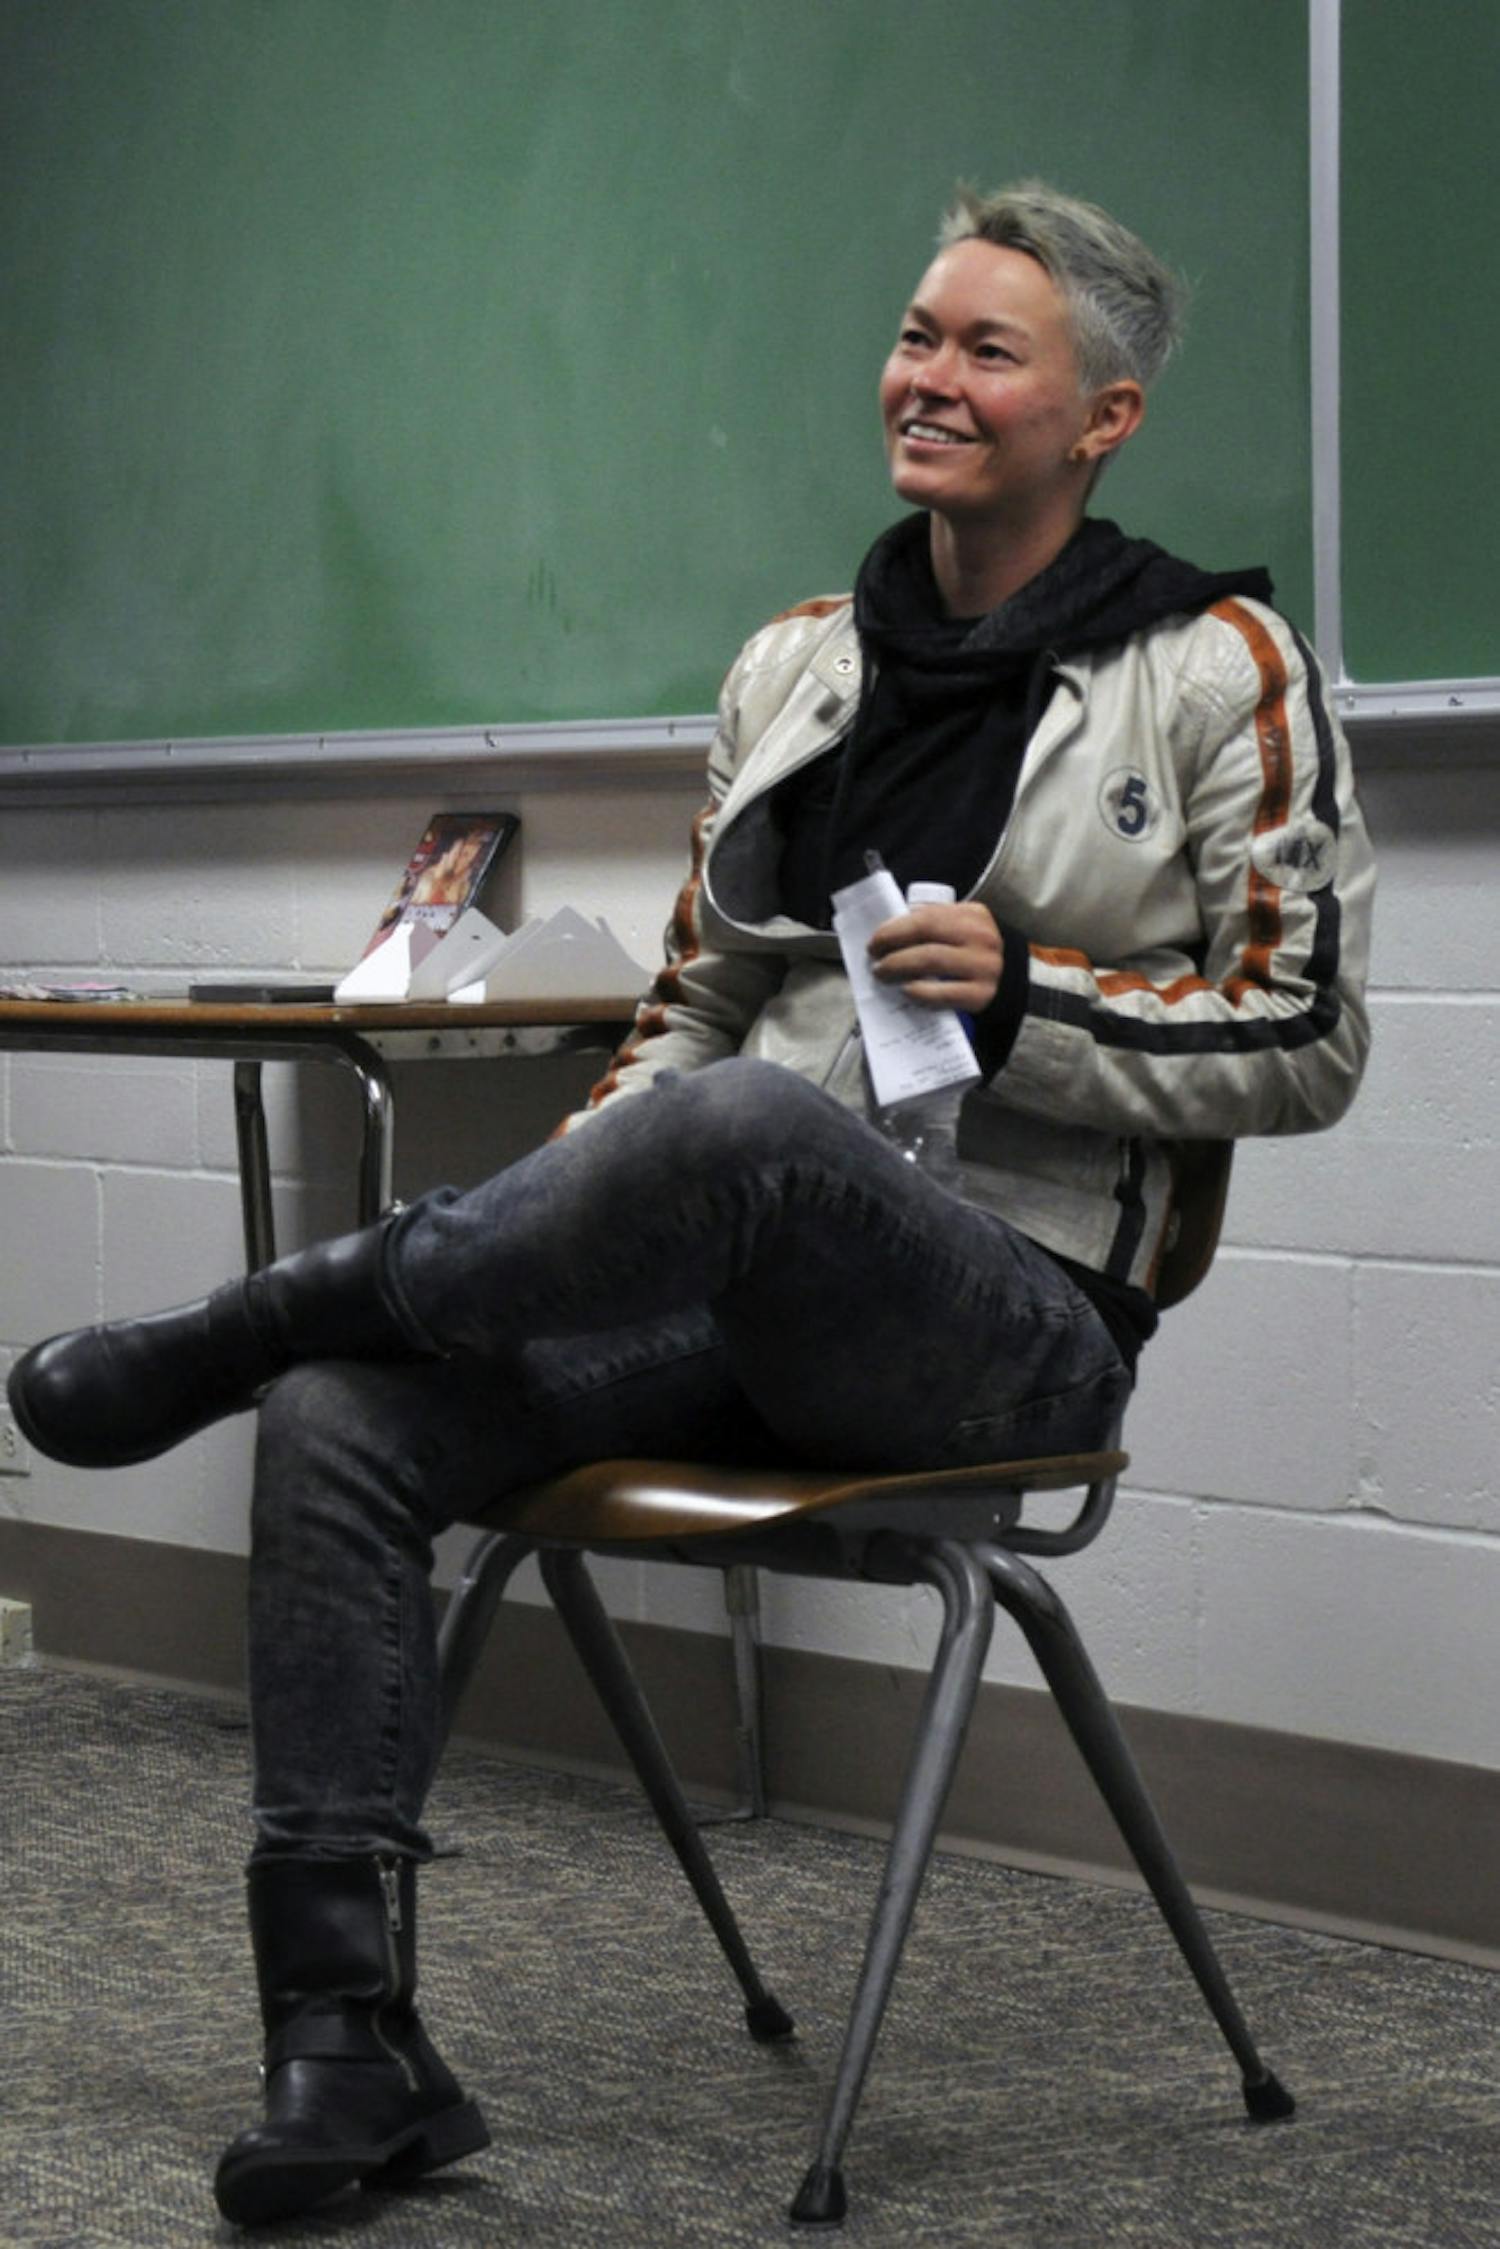 Jiz Lee, a 34-year-old gender queer adult film star, speaks to a small crowd on Wednesday as a part of Pride Student Union's Sexxx Week. Lee discussed their experience in porn, expressing gender and having sexual agency.